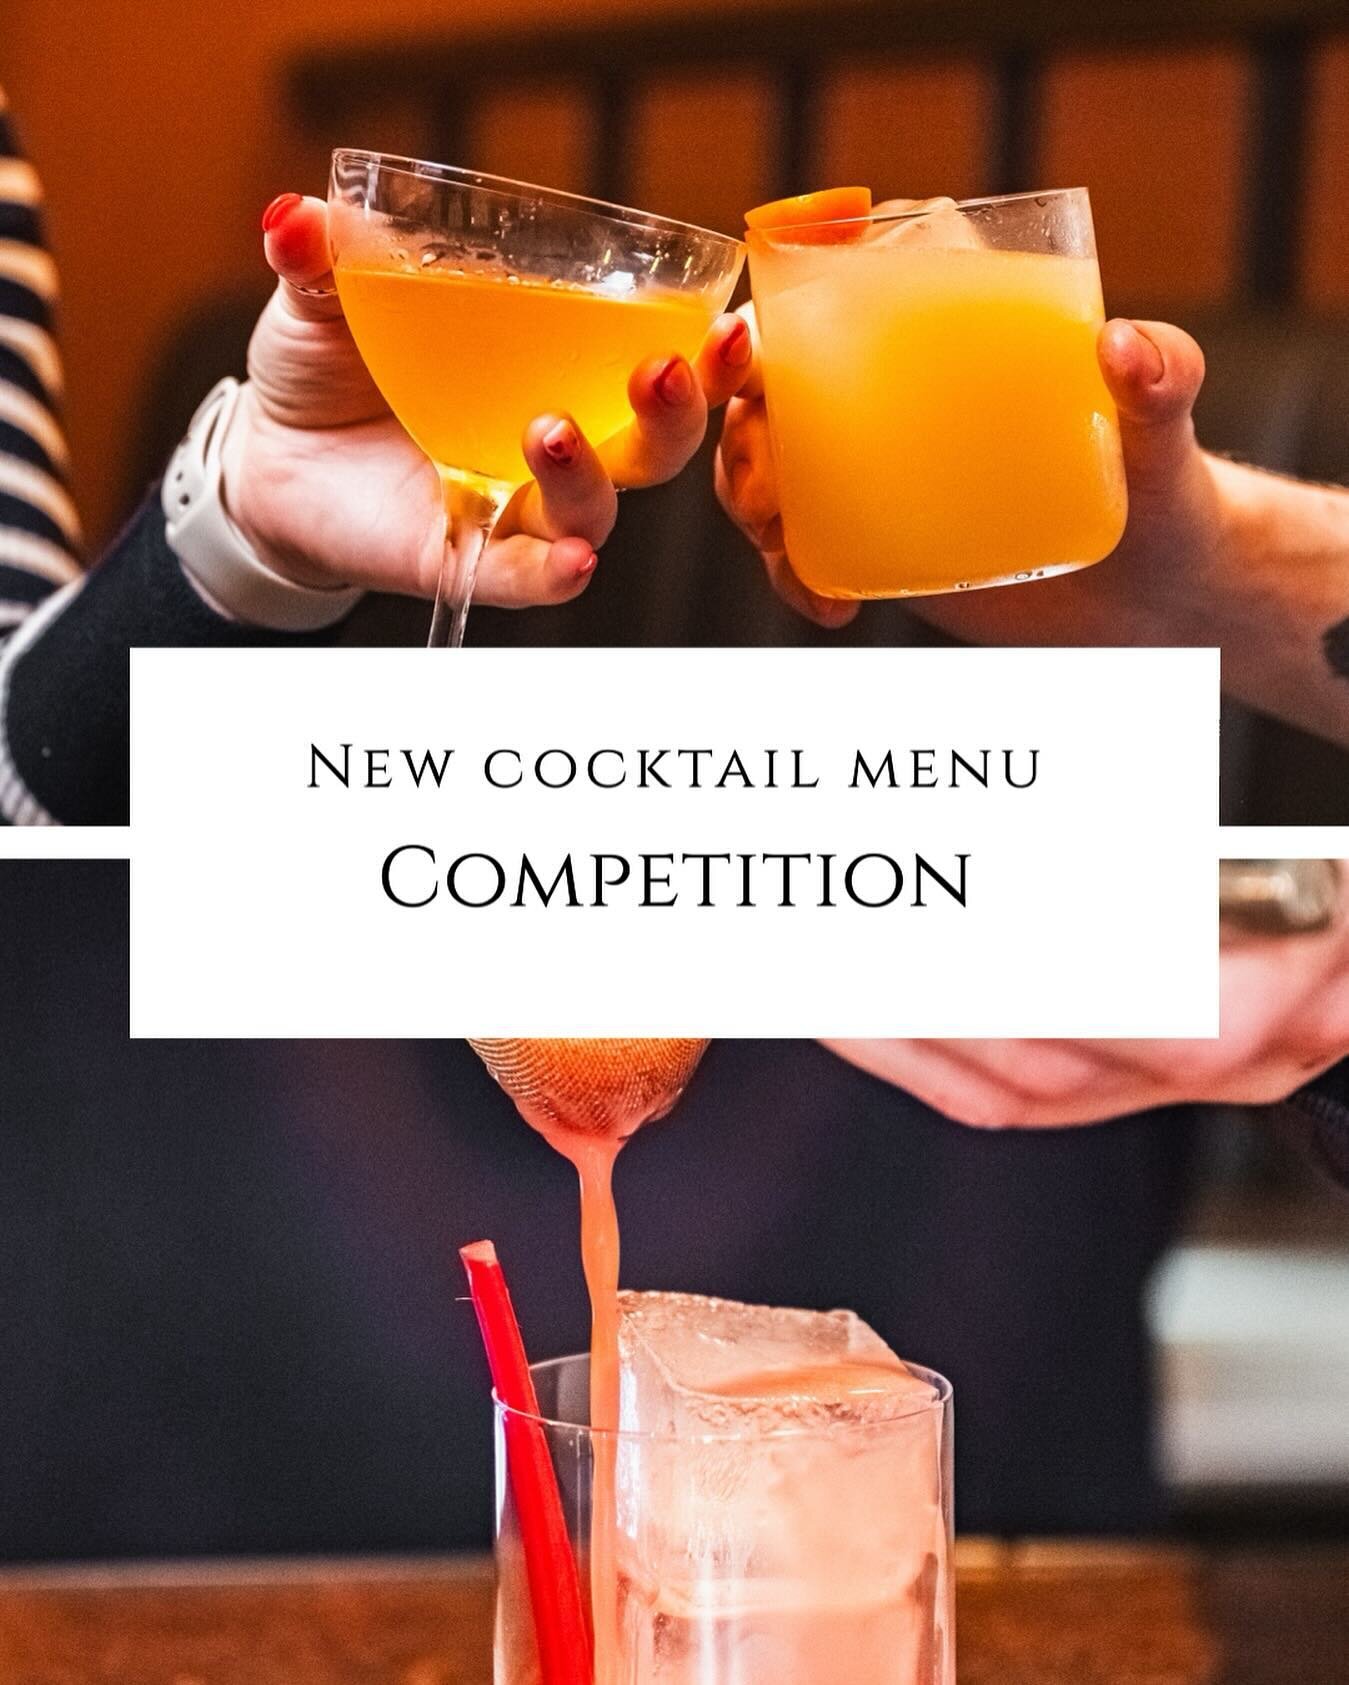 ✨✨COMPETITION✨✨

To celebrate the launch of our SIXTH cocktail menu on Wednesday the 28th, we&rsquo;re giving one lucky person the chance the win a &pound;75 voucher to spend sampling all the new creations.

All you got to do to enter is simply the f